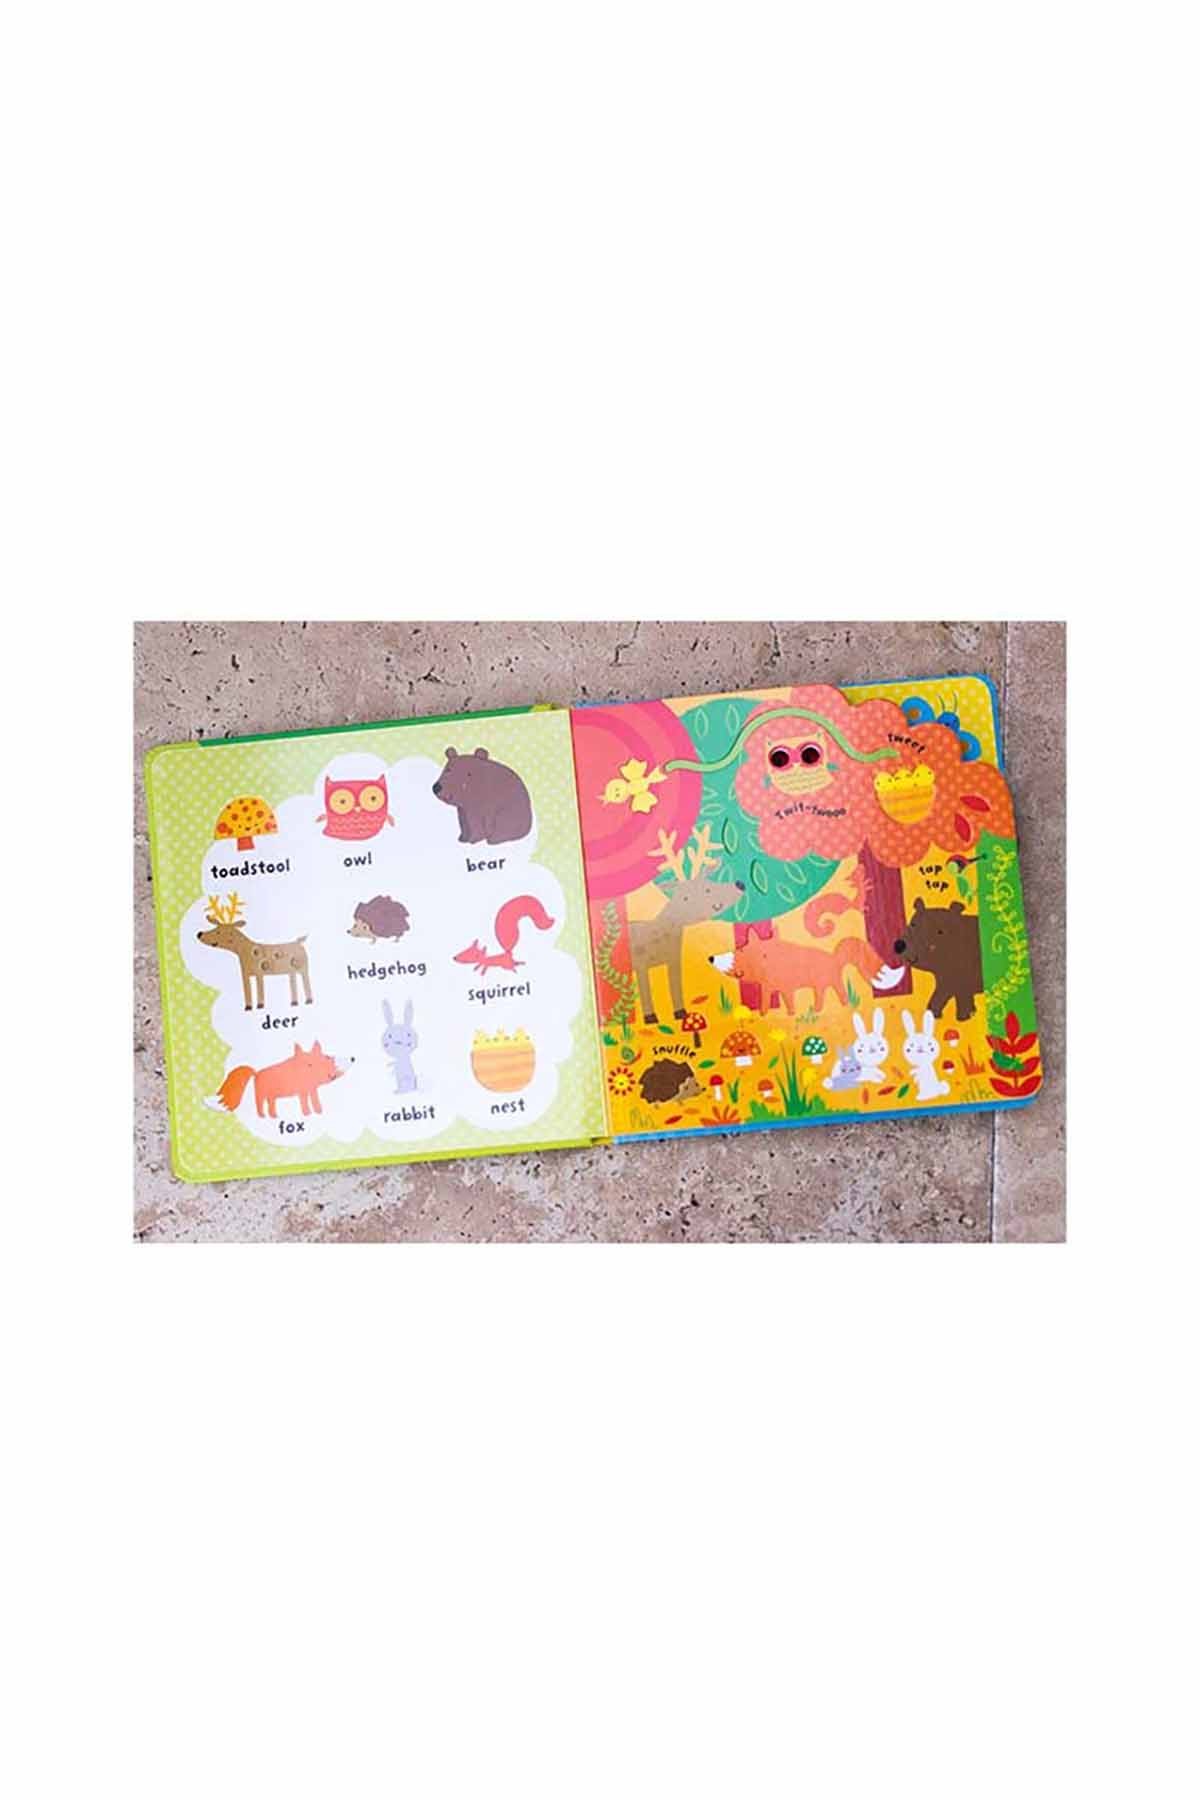 The Usborne Baby's Very First Play Book Animal Words